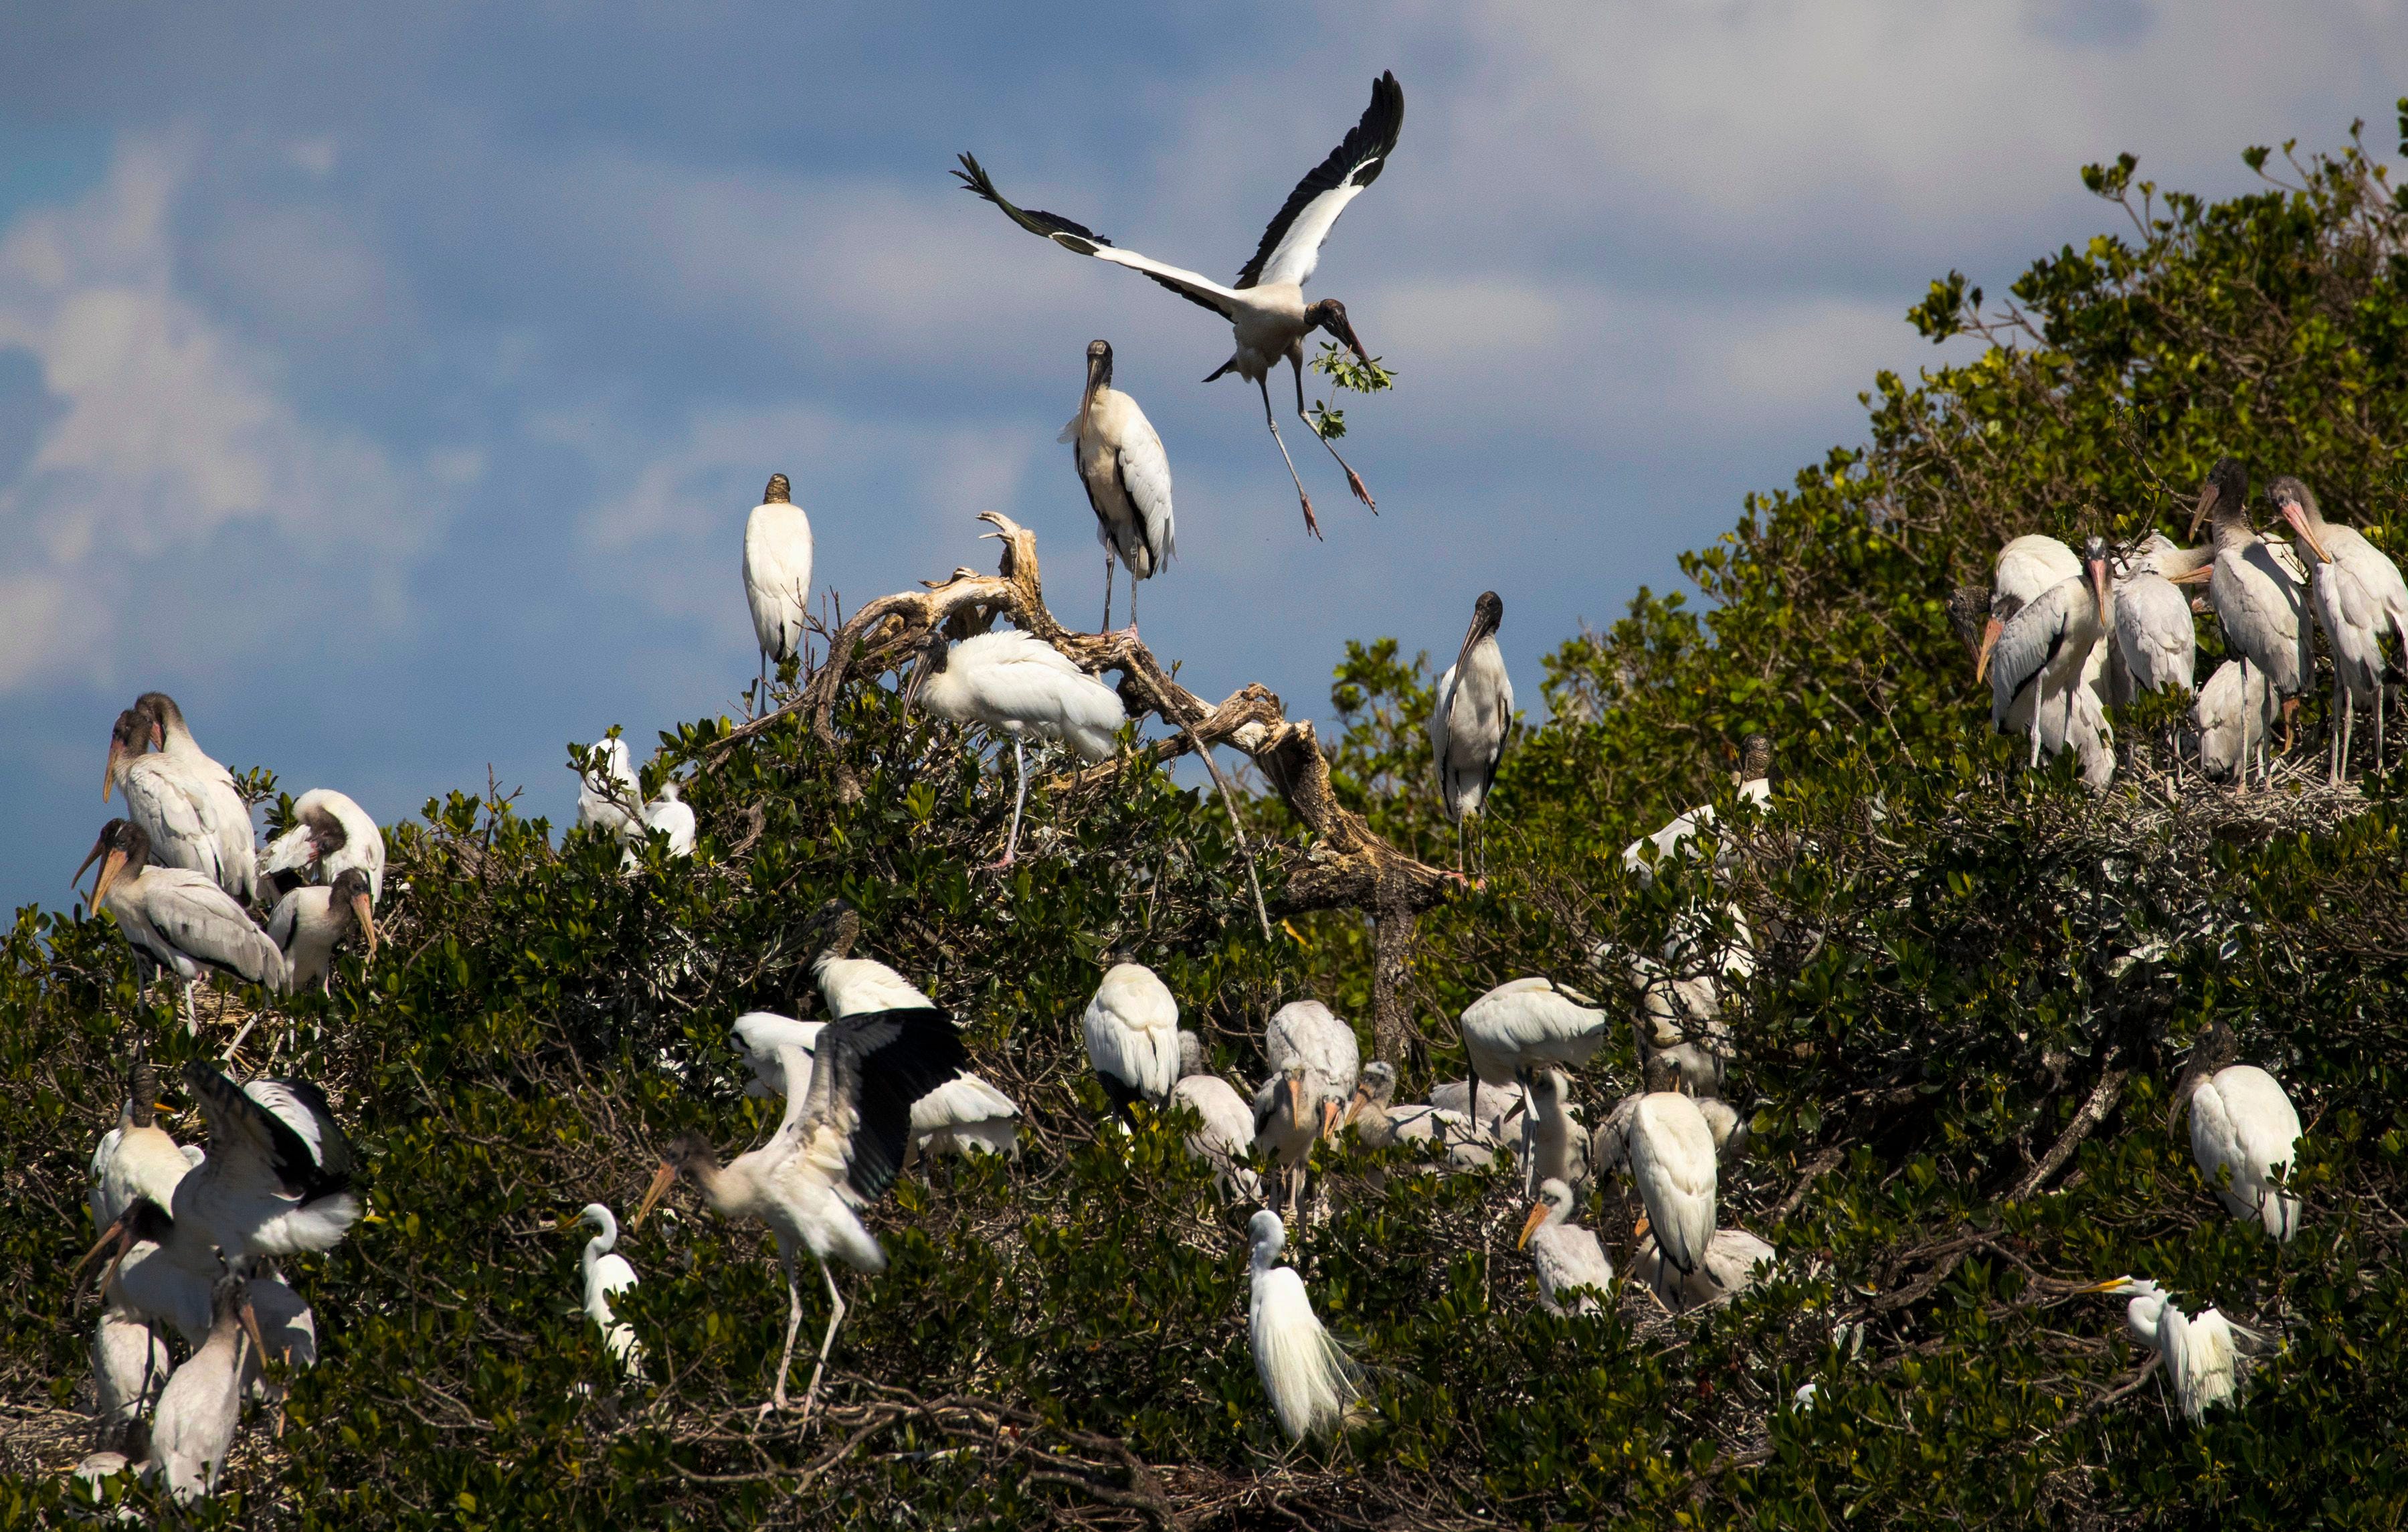 A wood stork looks for a nesting area along one of the rookery islands on the Caloosahatchee River.